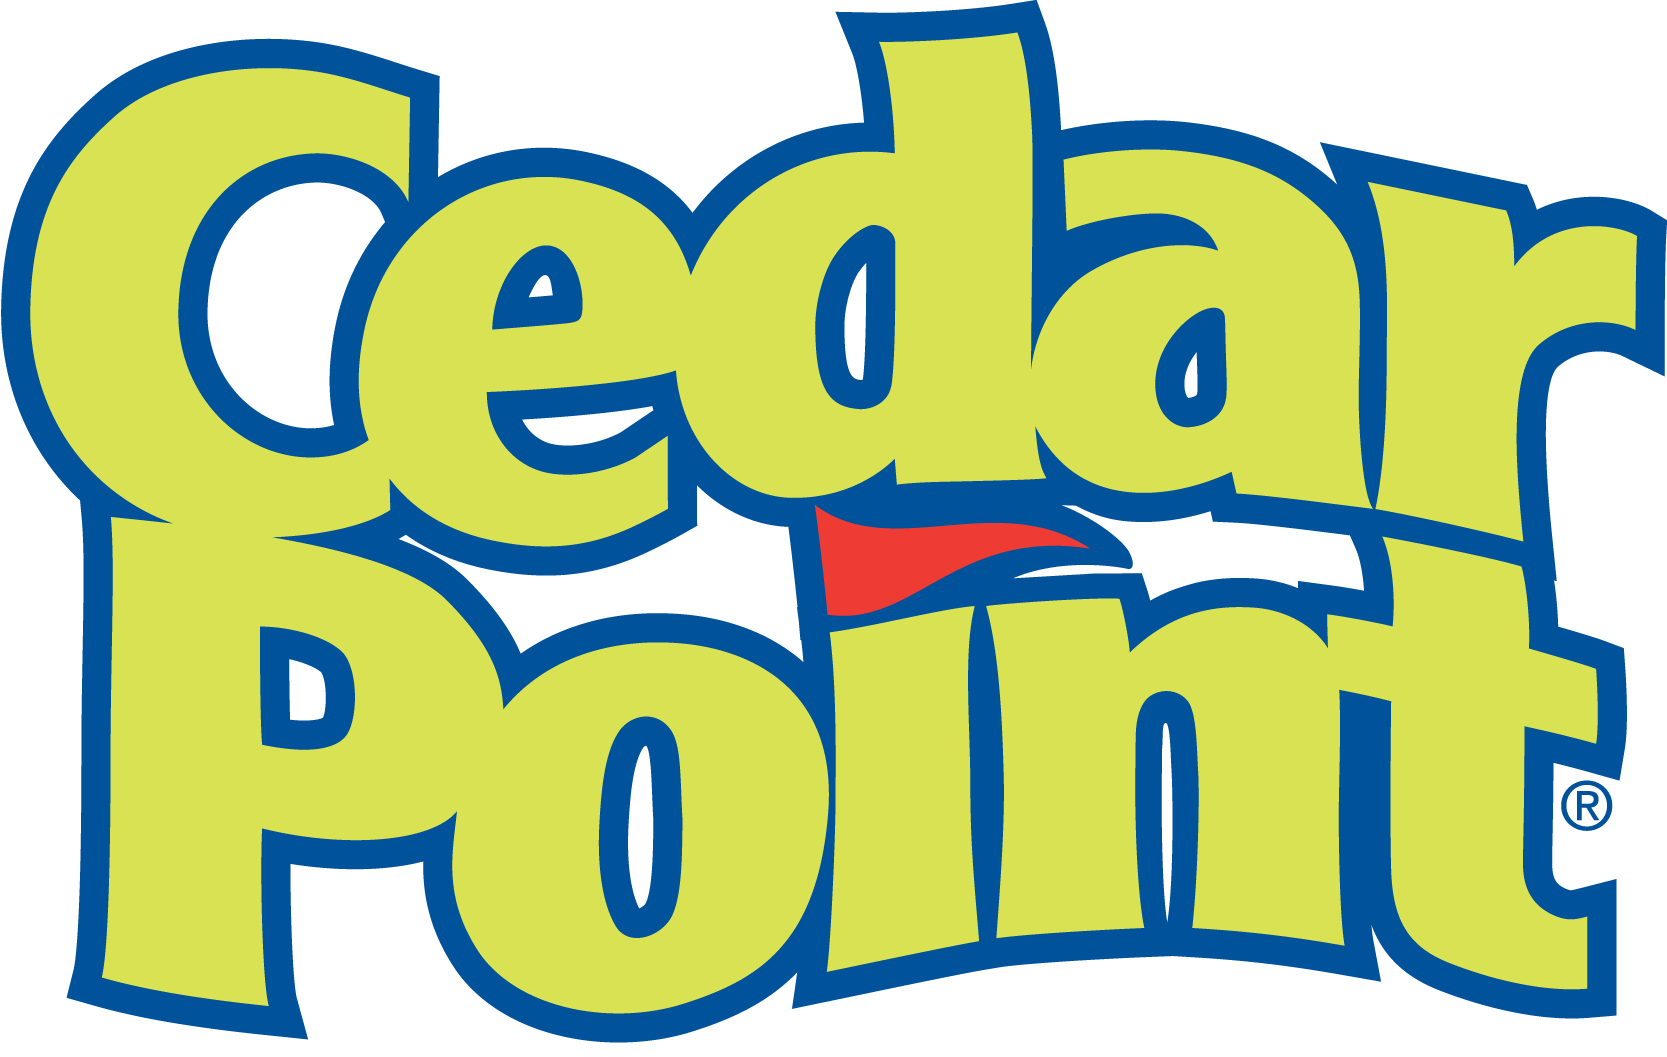 New for 2014 at Cedar Point!